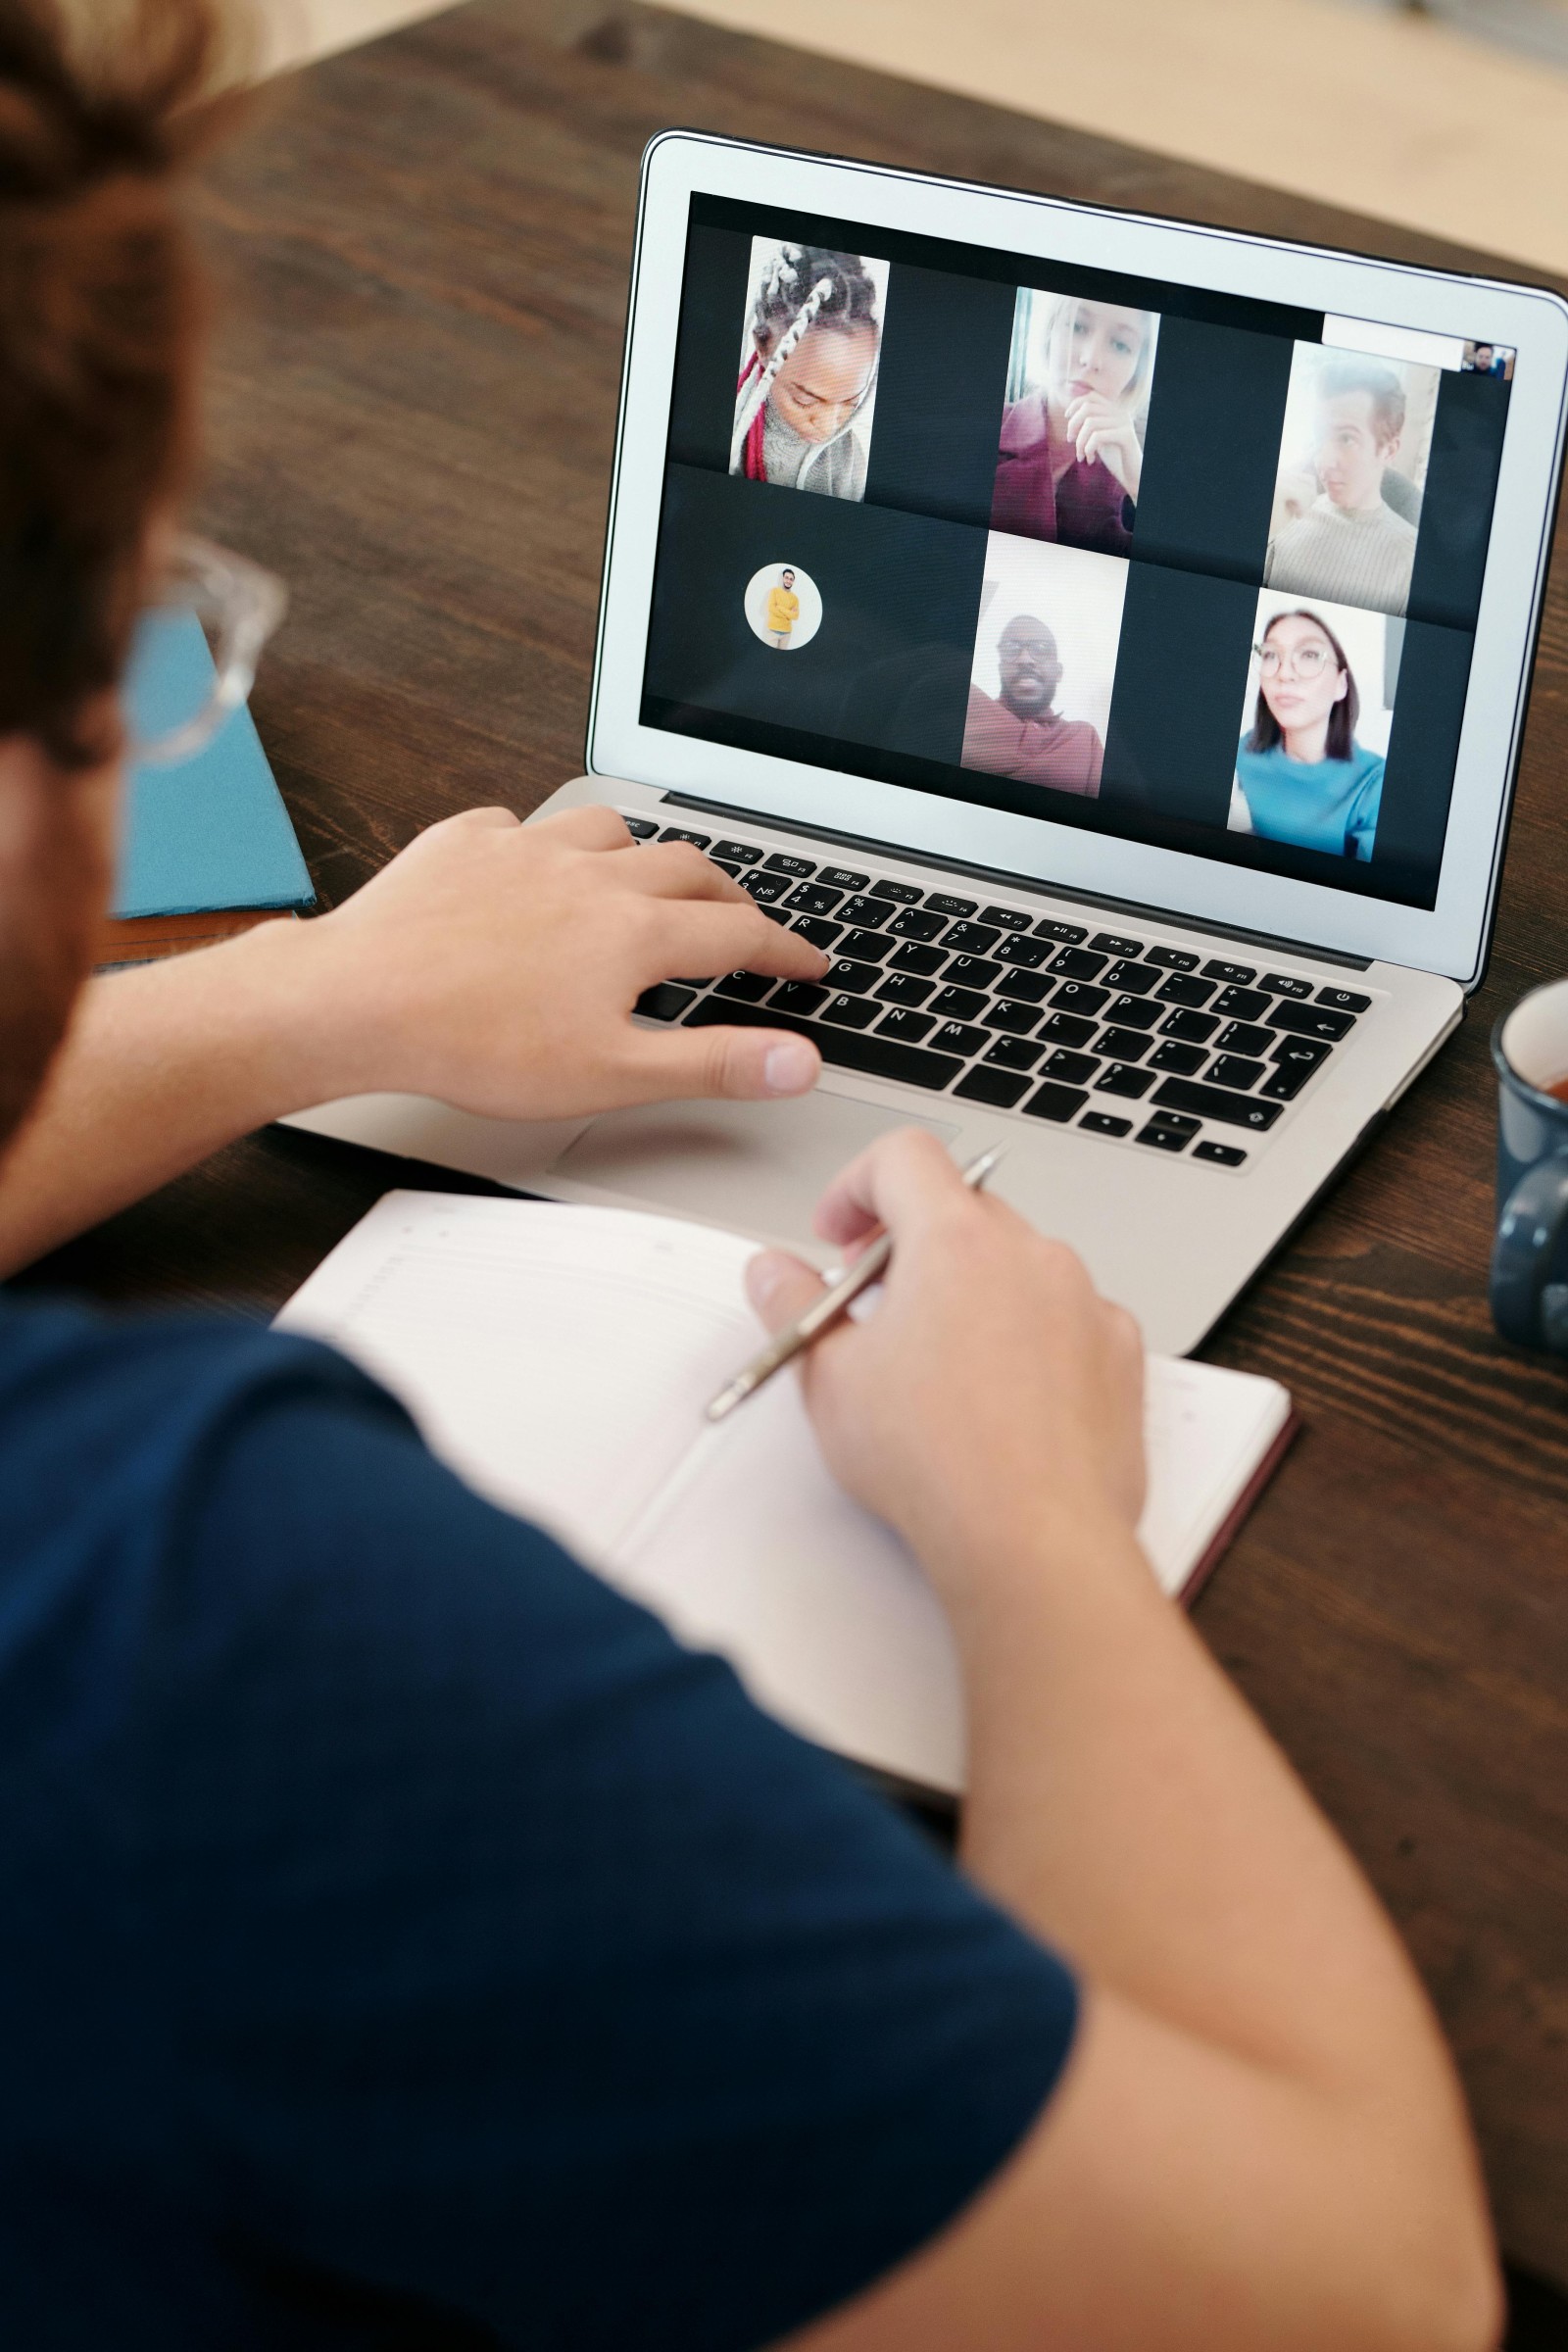 person looking at a laptop screen with images of others in an online meeting